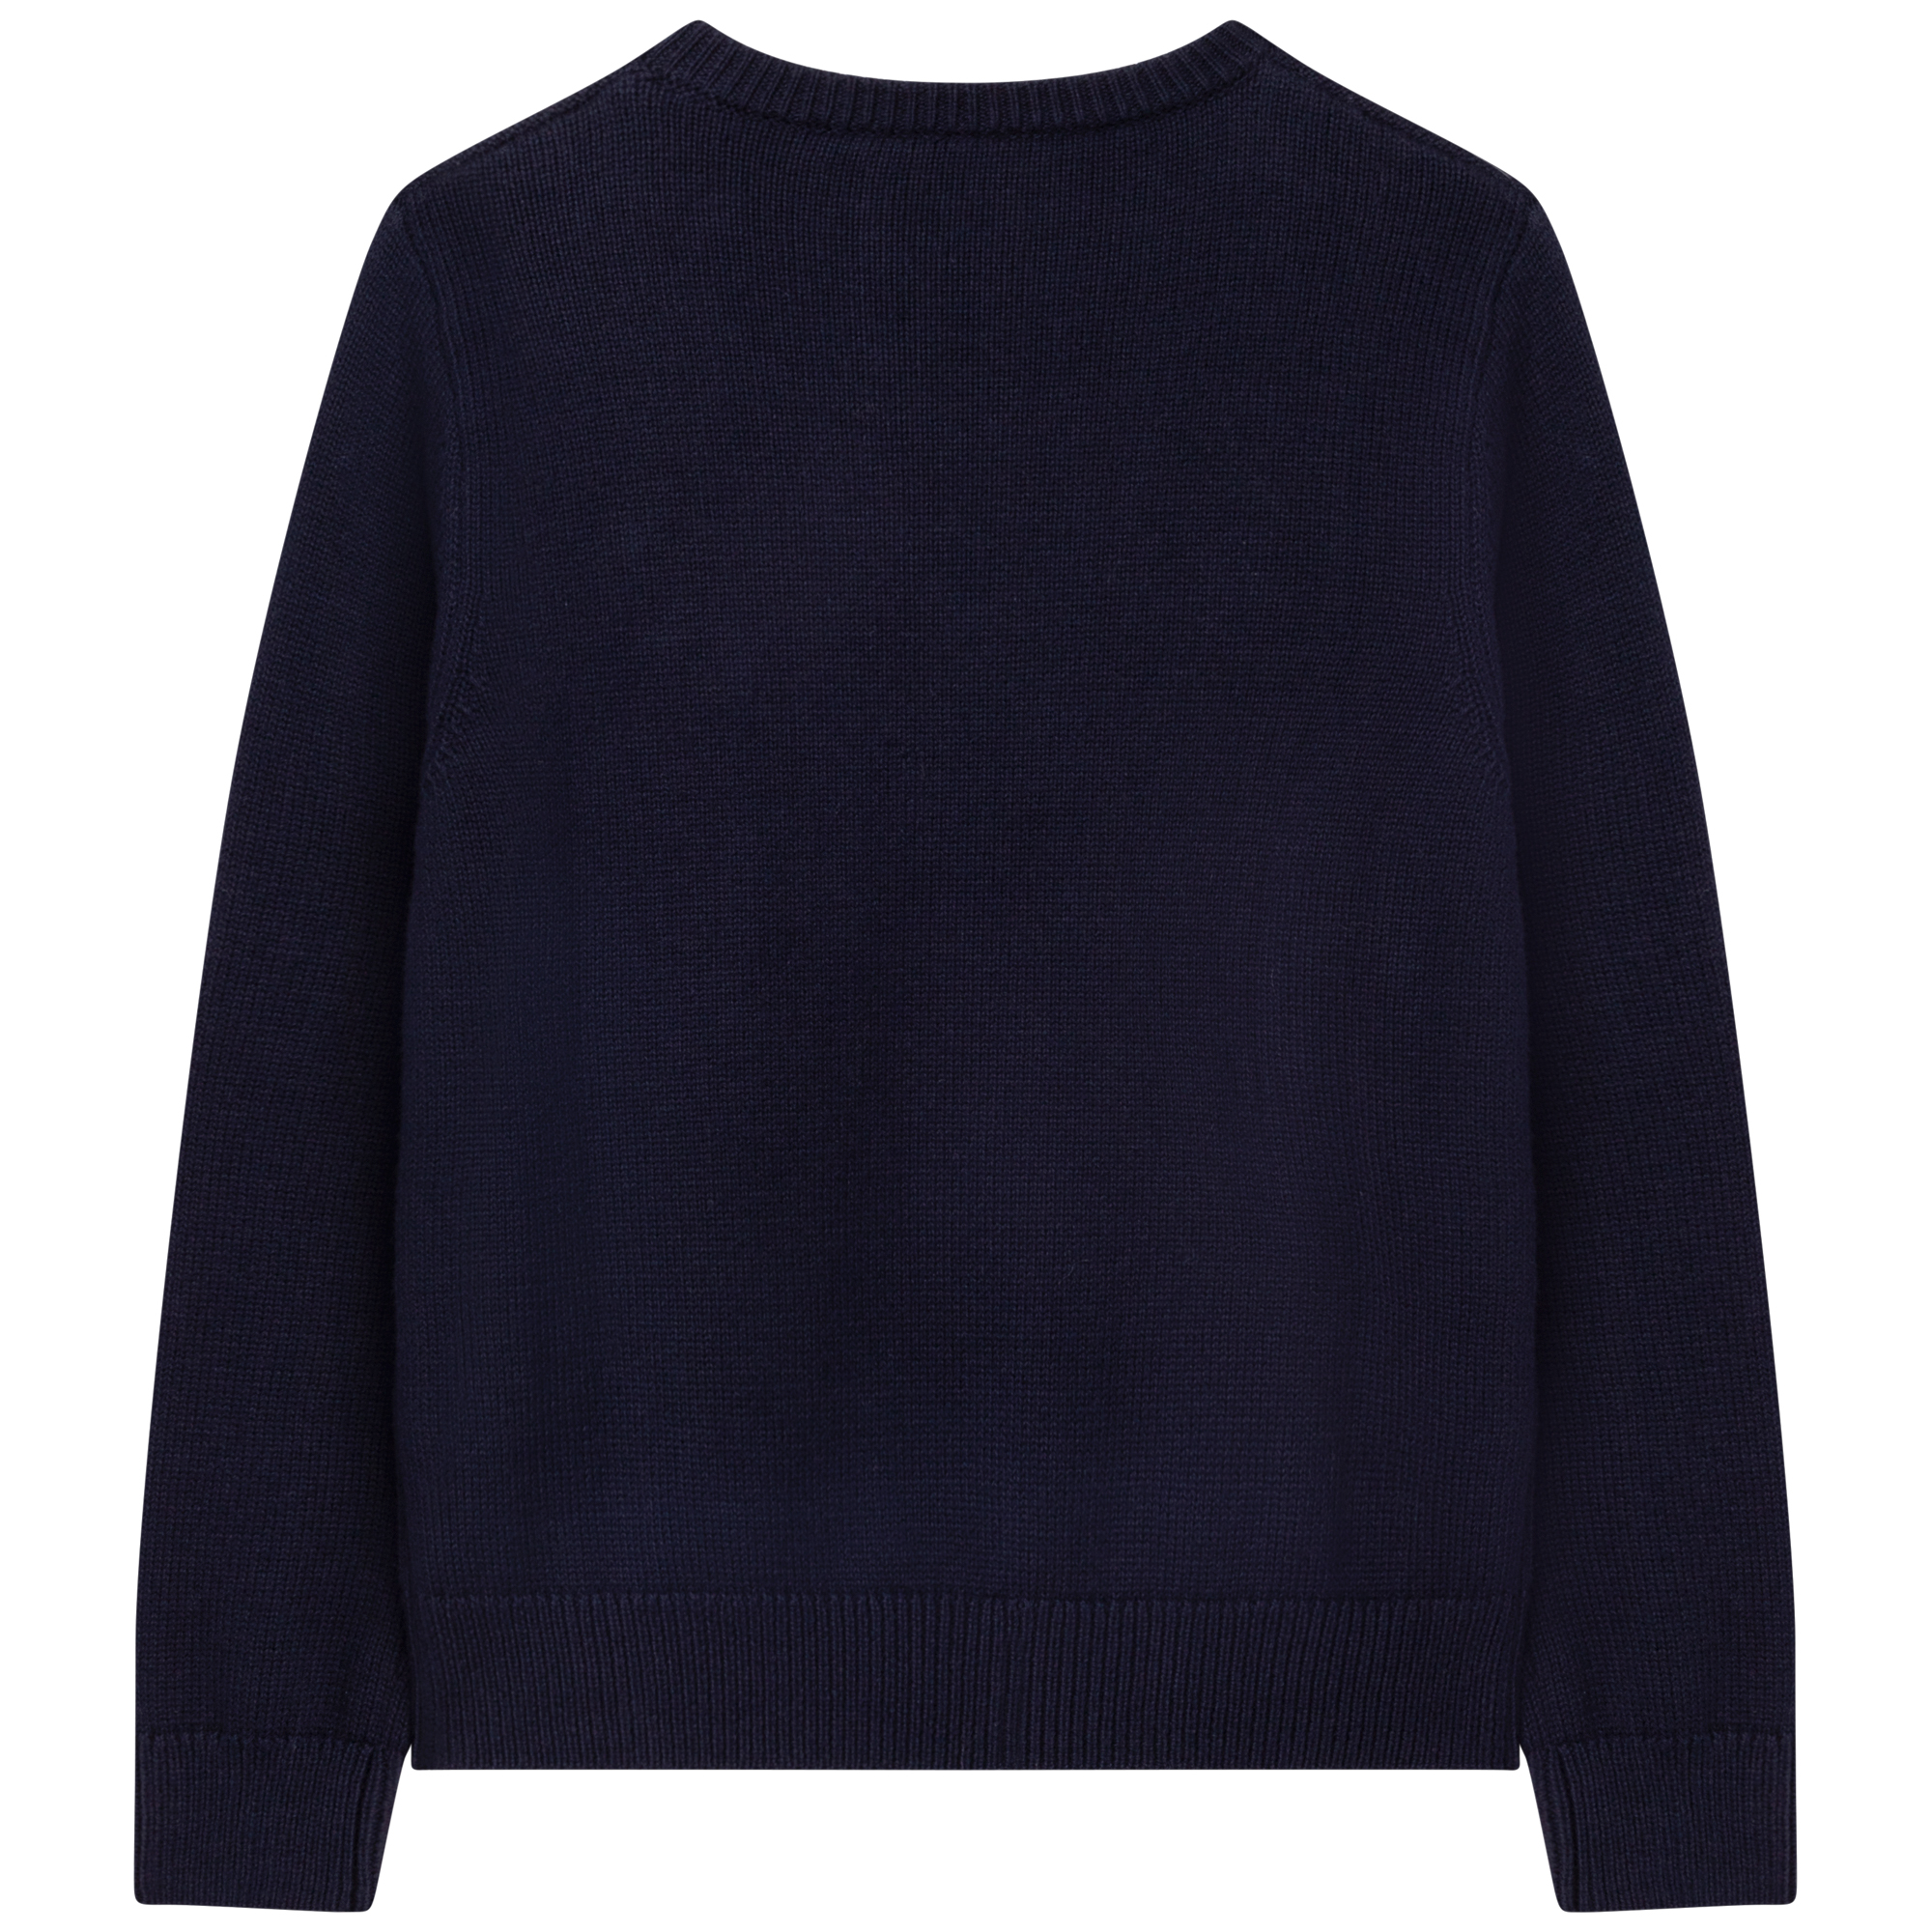 Wool and cotton sweater LANVIN for BOY